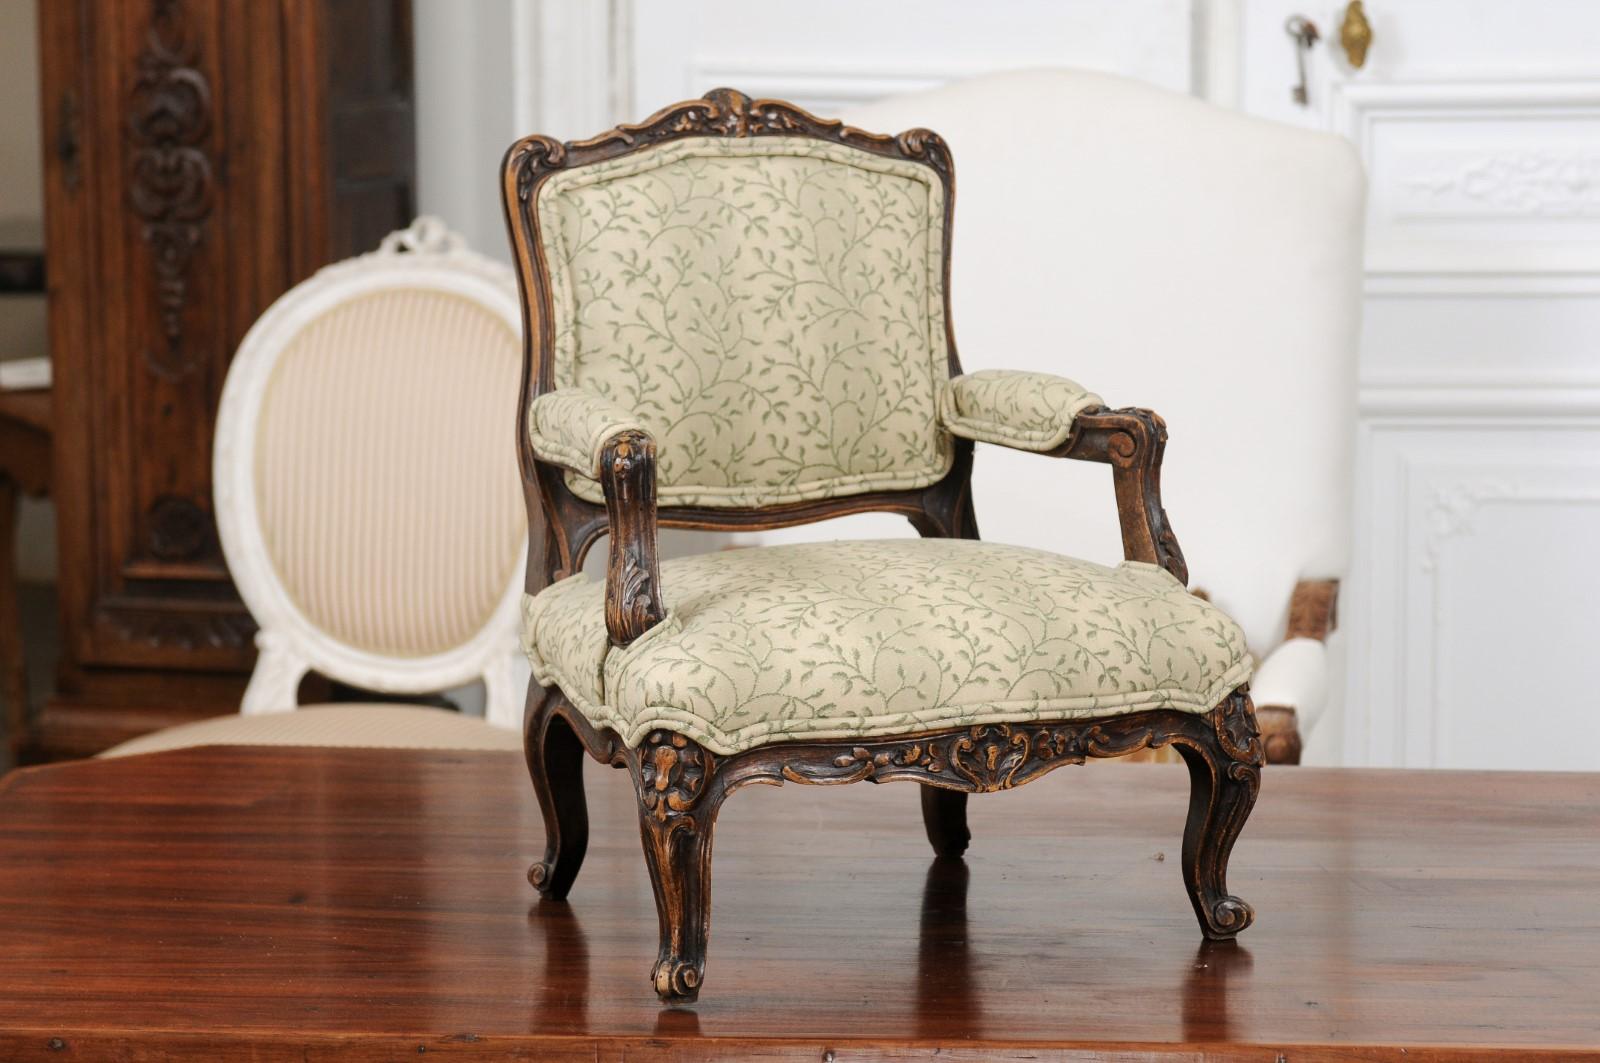 A petite French Louis XV period apprentice chair from the mid-18th century, with new floral upholstery. Born in France during the reign of King Louis XV nicknamed the beloved and created to demonstrate an apprentice menuisier's skill, this petite